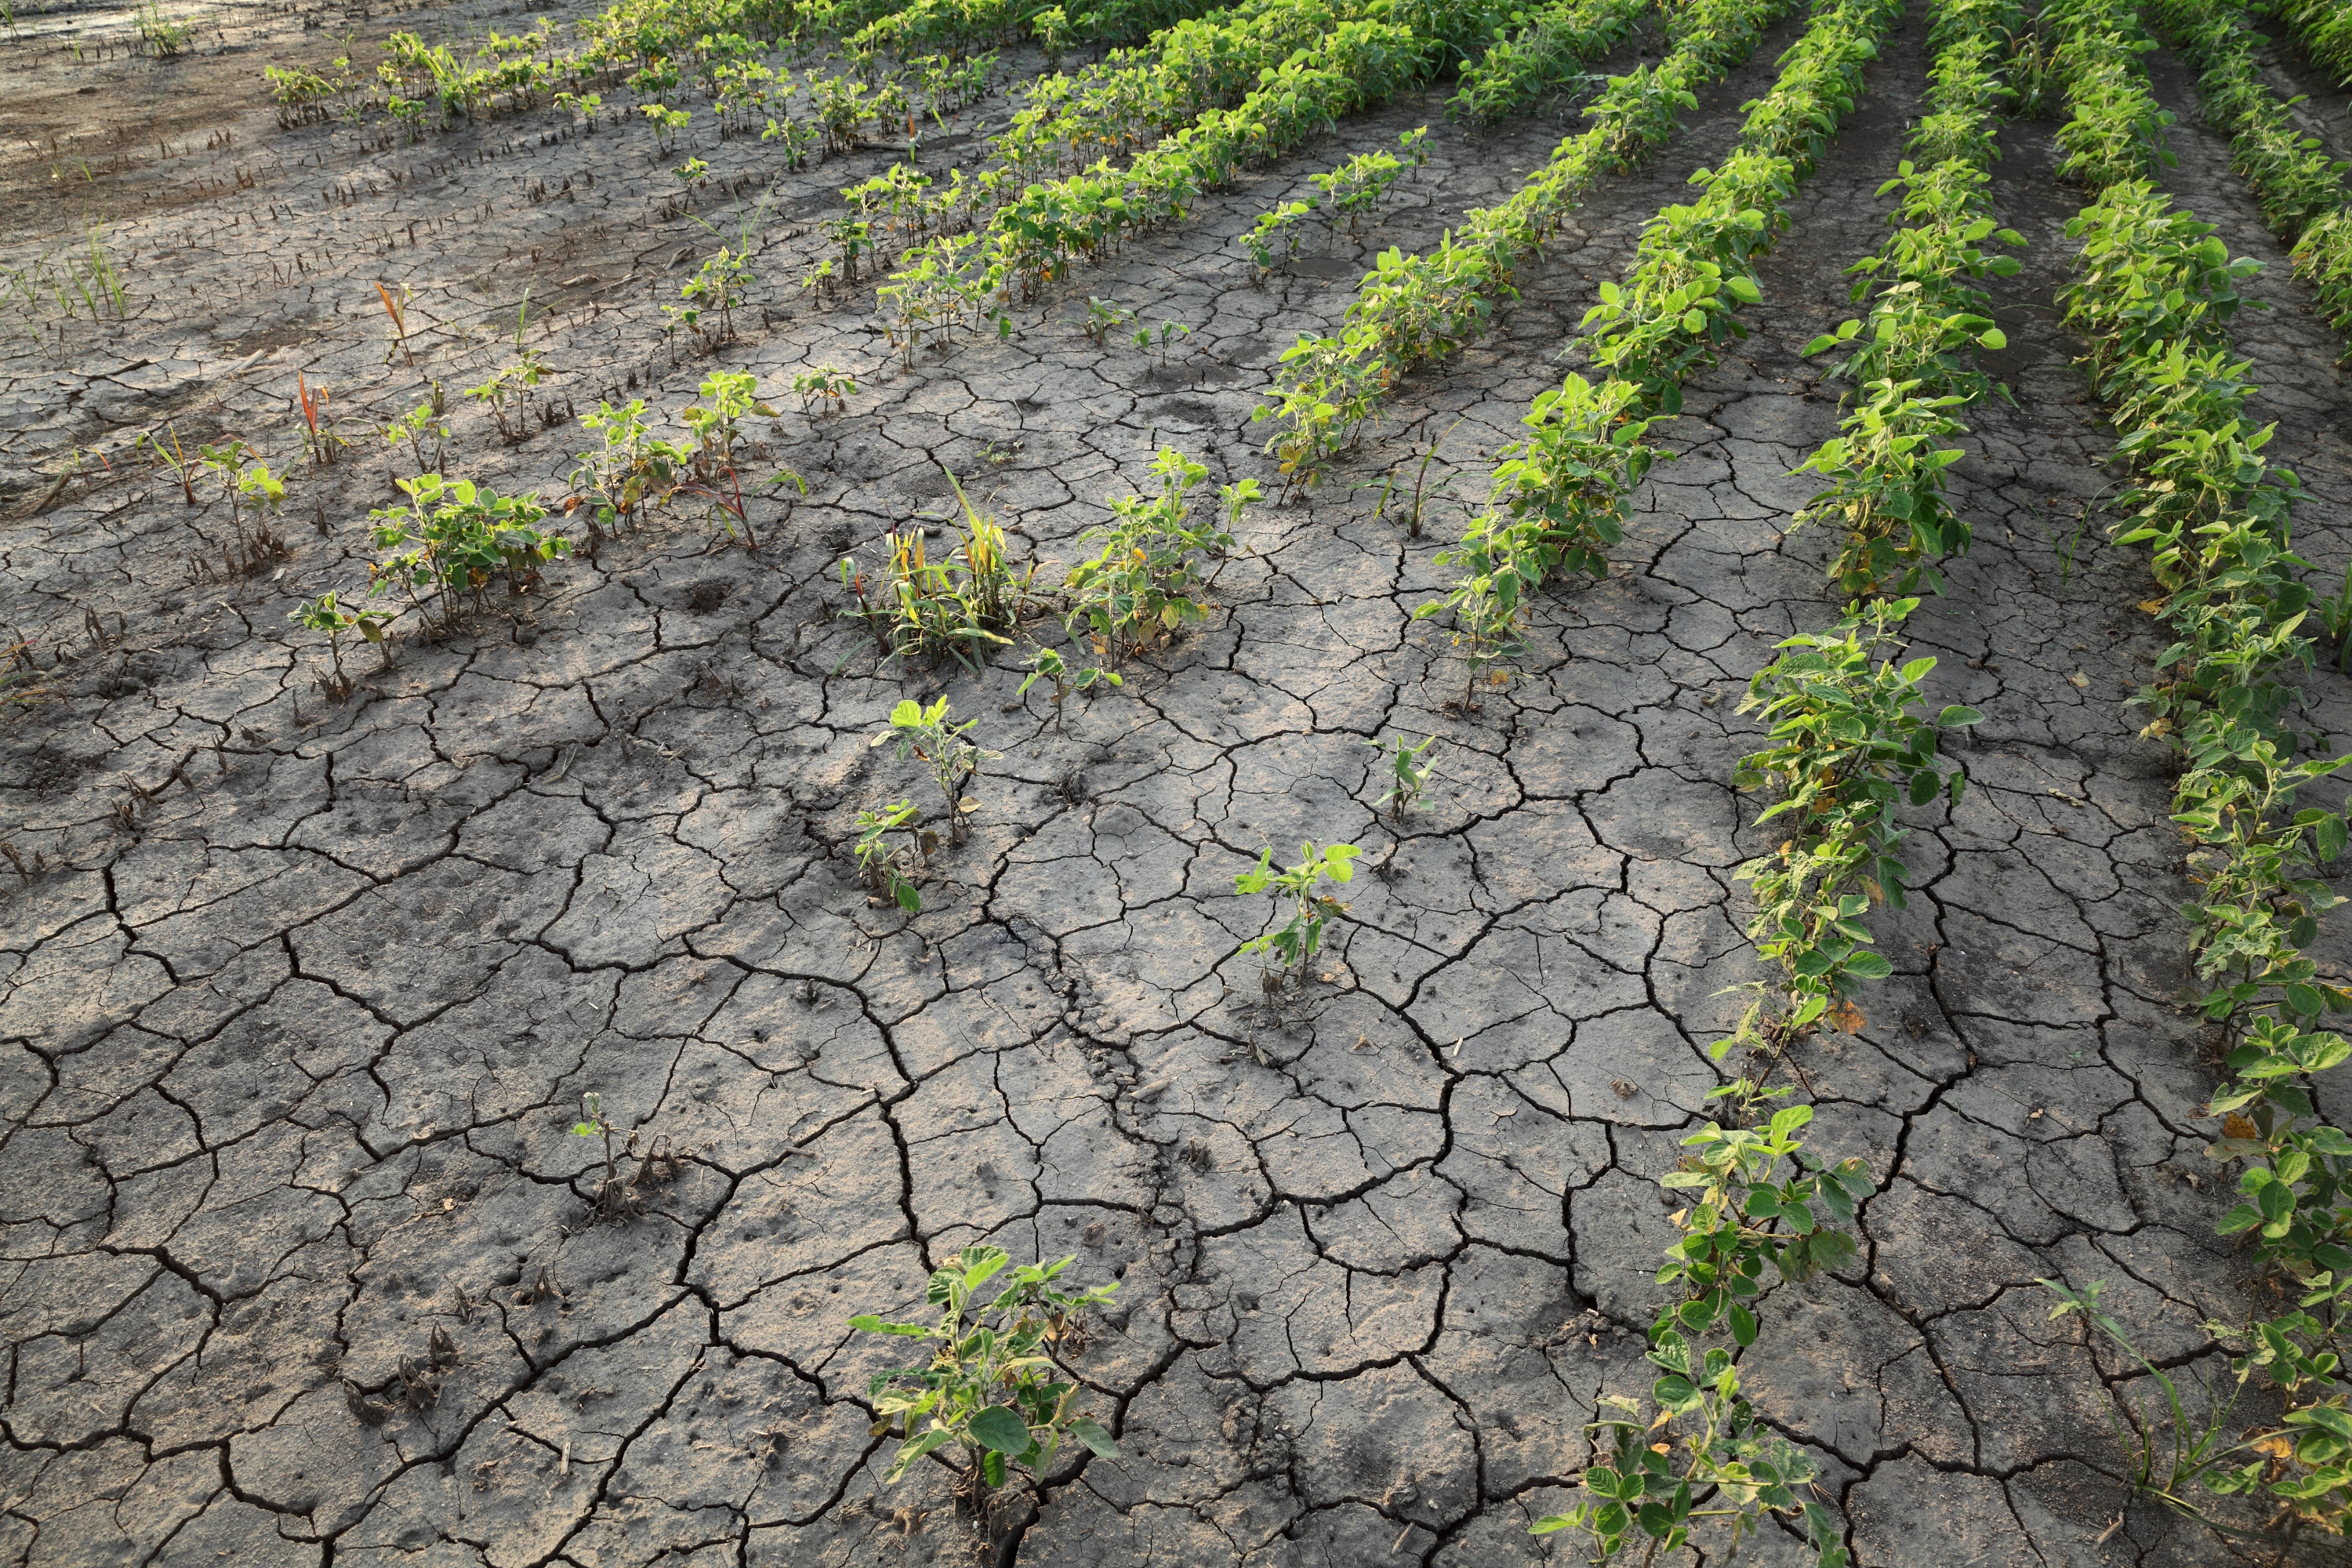 Drought after flood in soy bean field with cracked land and damaged plants